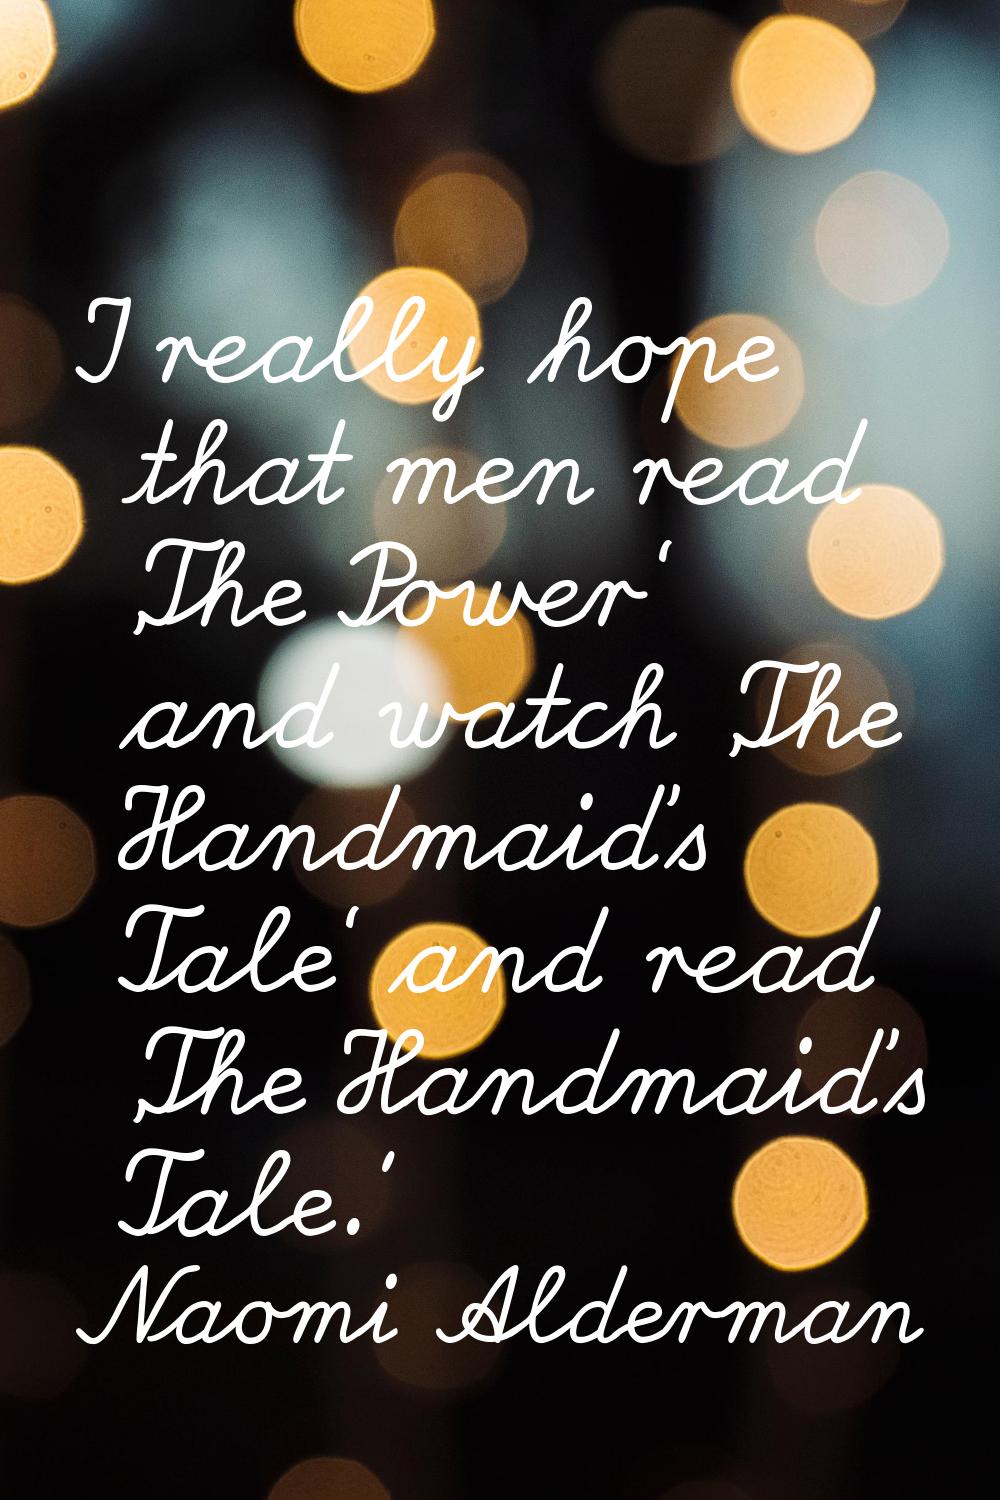 I really hope that men read 'The Power' and watch 'The Handmaid's Tale' and read 'The Handmaid's Ta